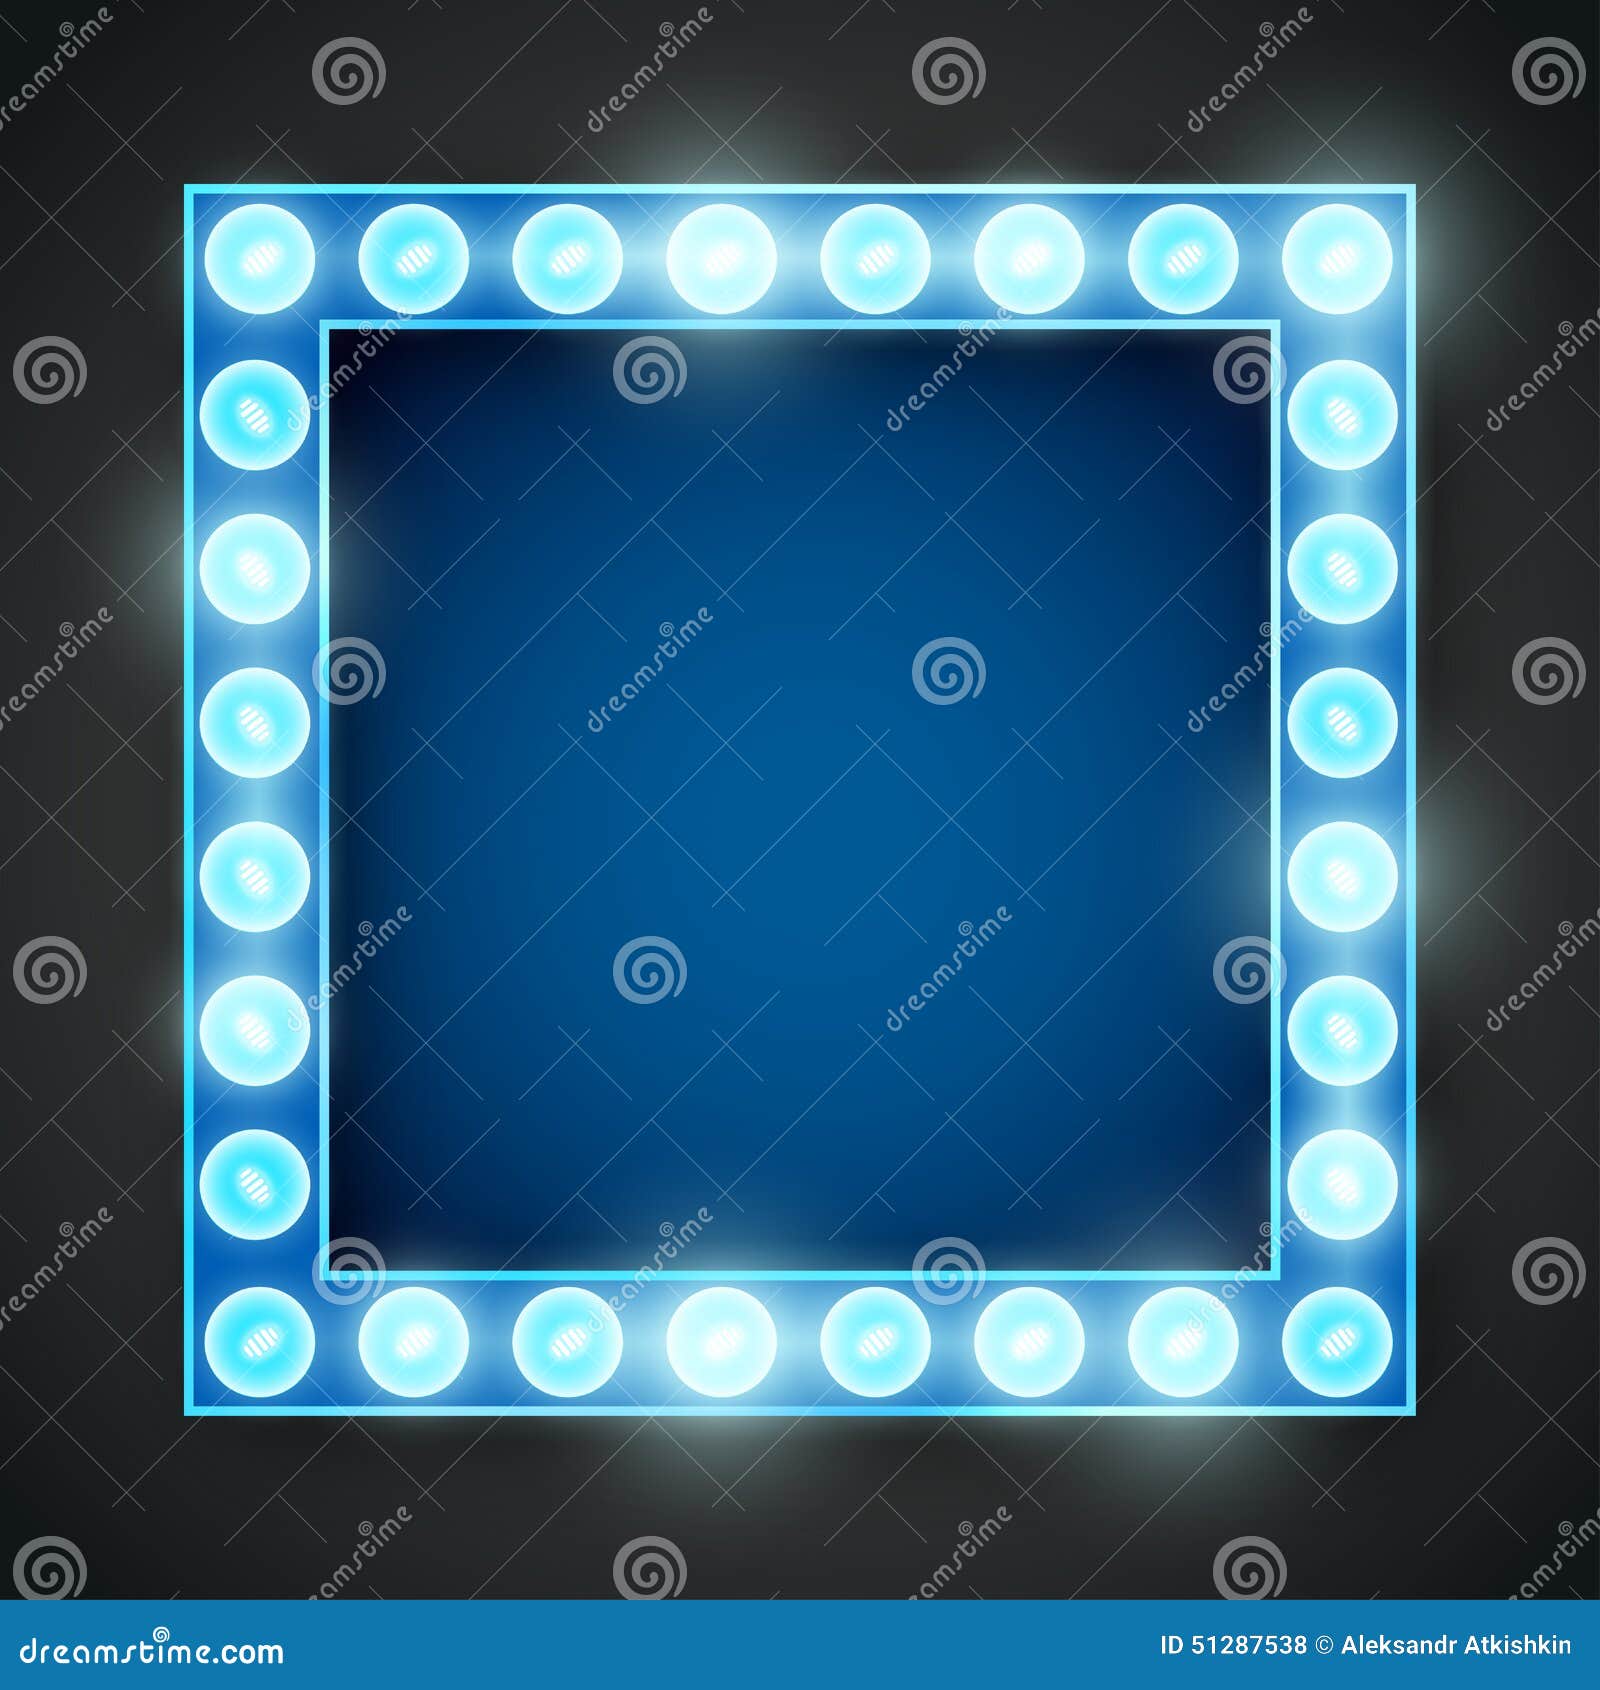 Cut out template for lamp Royalty Free Vector Image